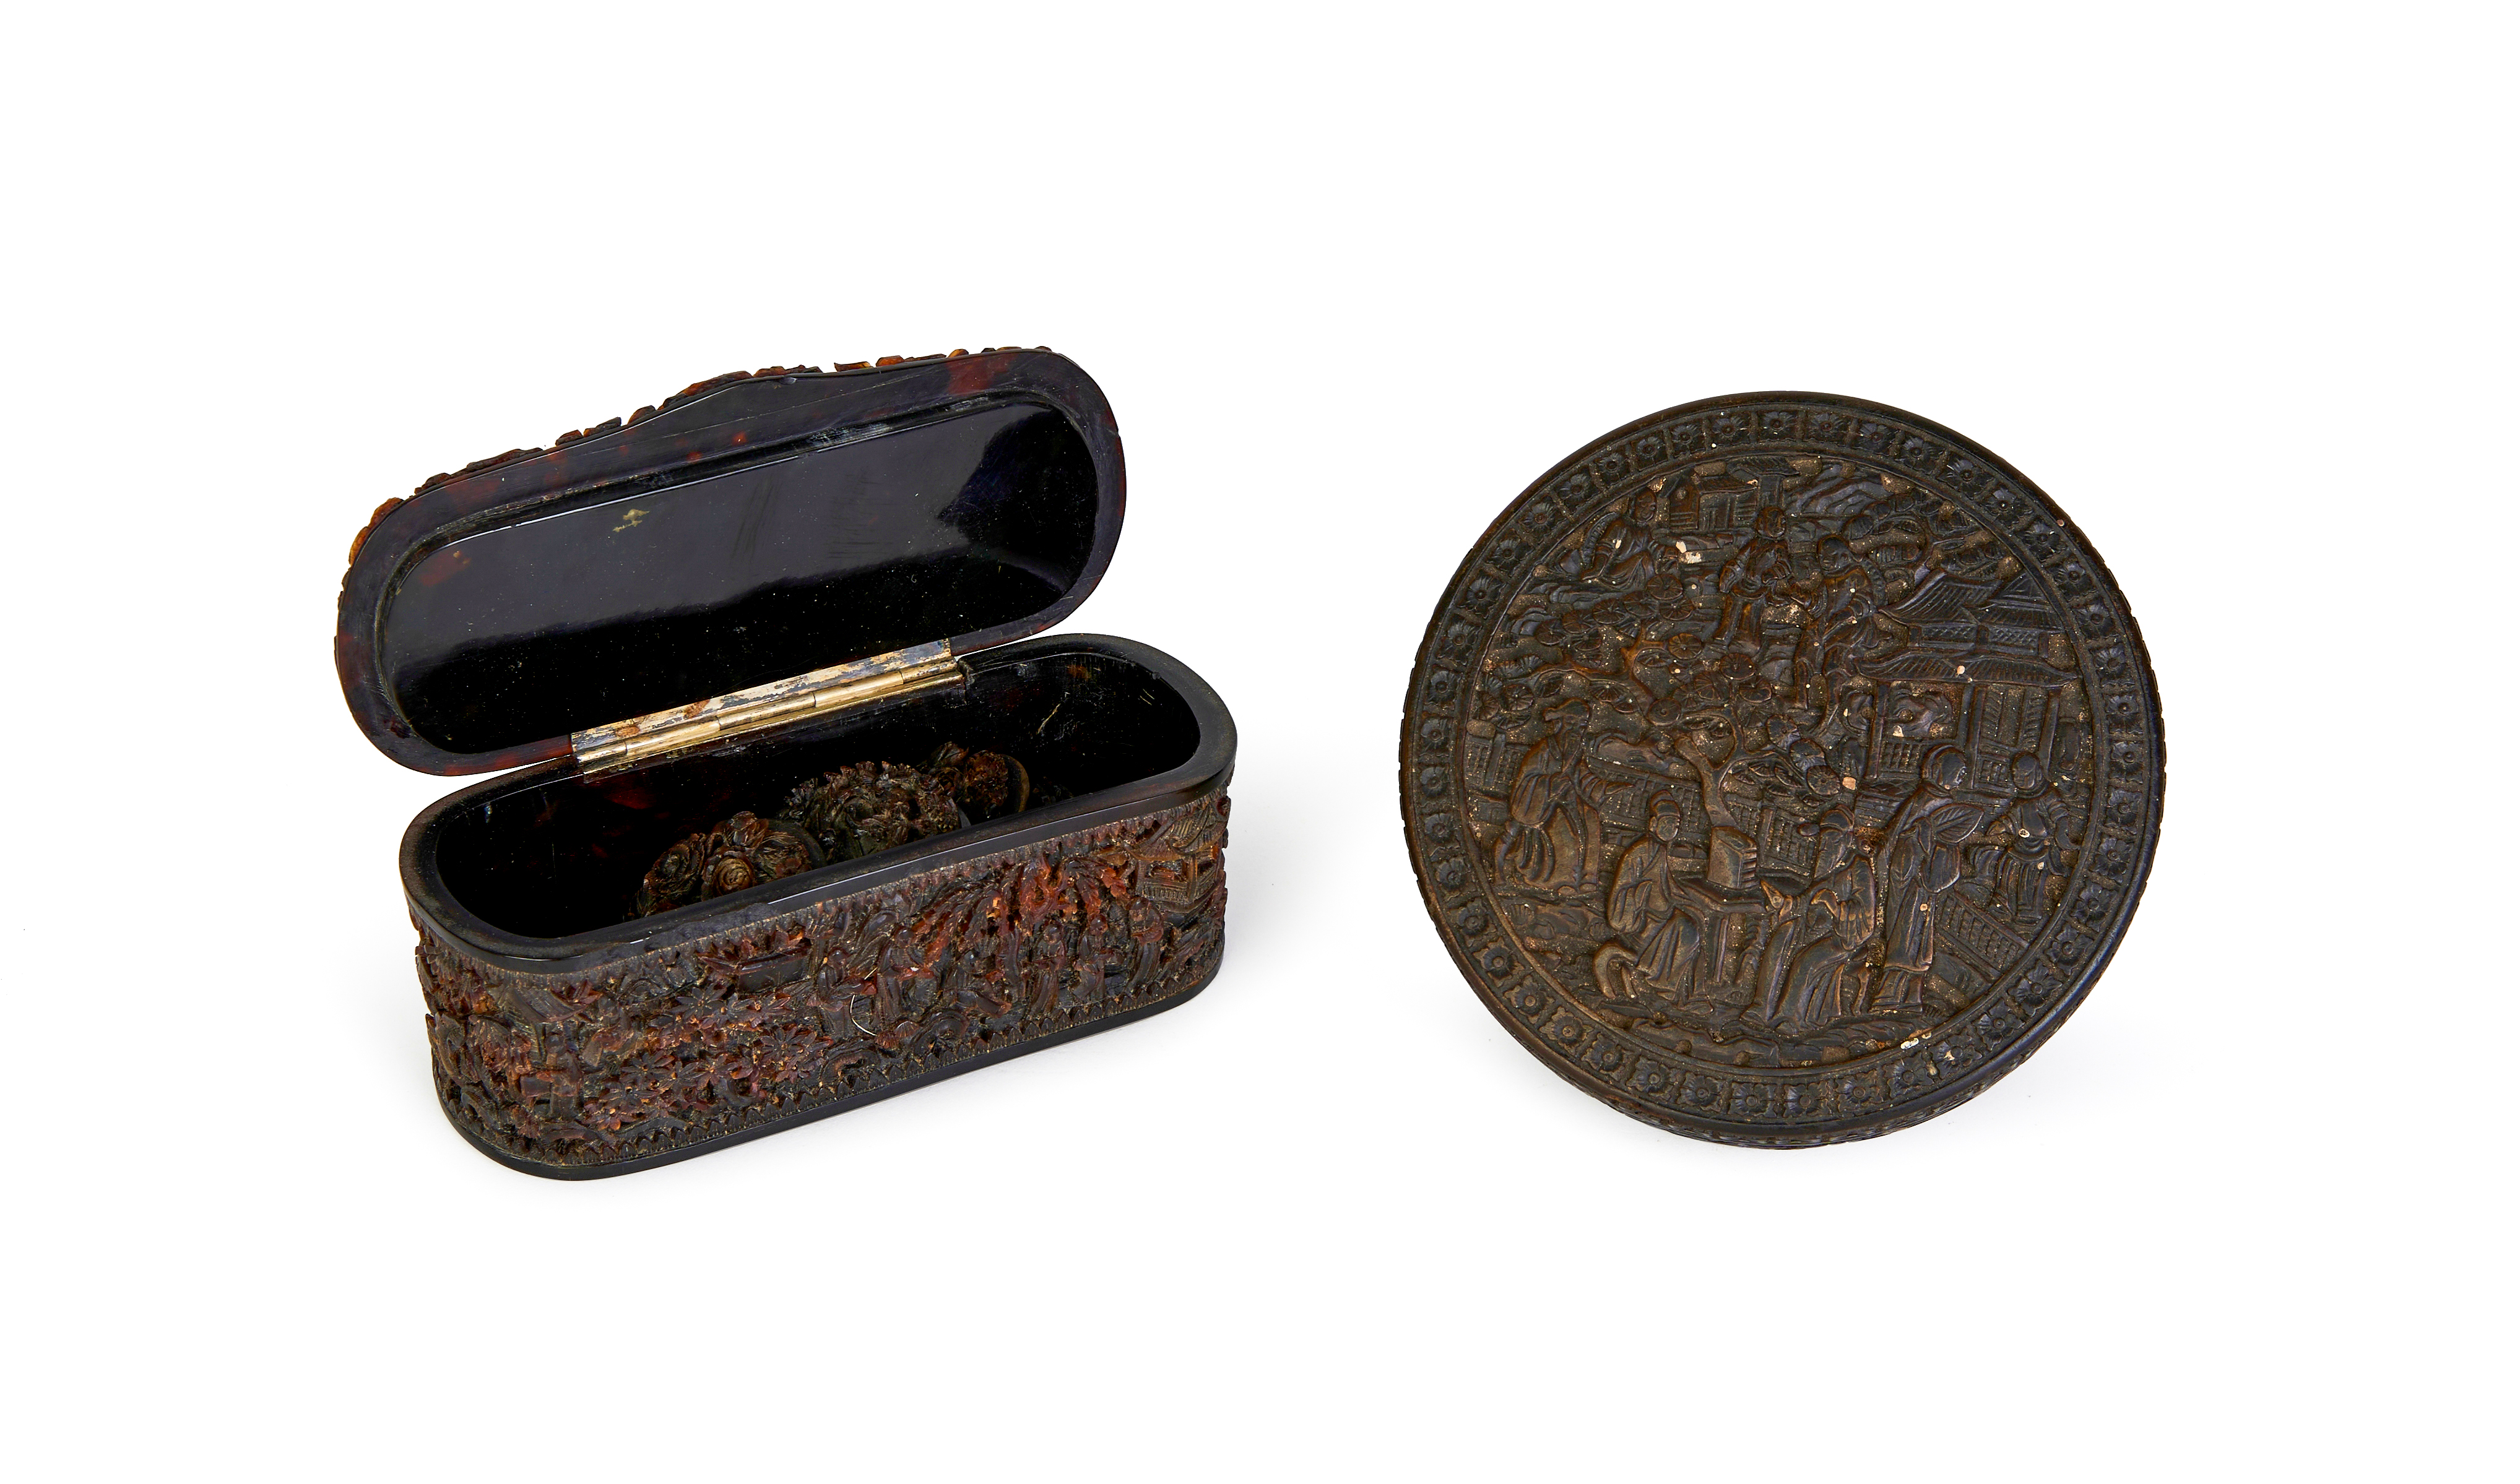 ASSORTMENT OF CARVED CHINESE TORTOISE SHELL BOXES, 18TH CENTURY - Image 9 of 9